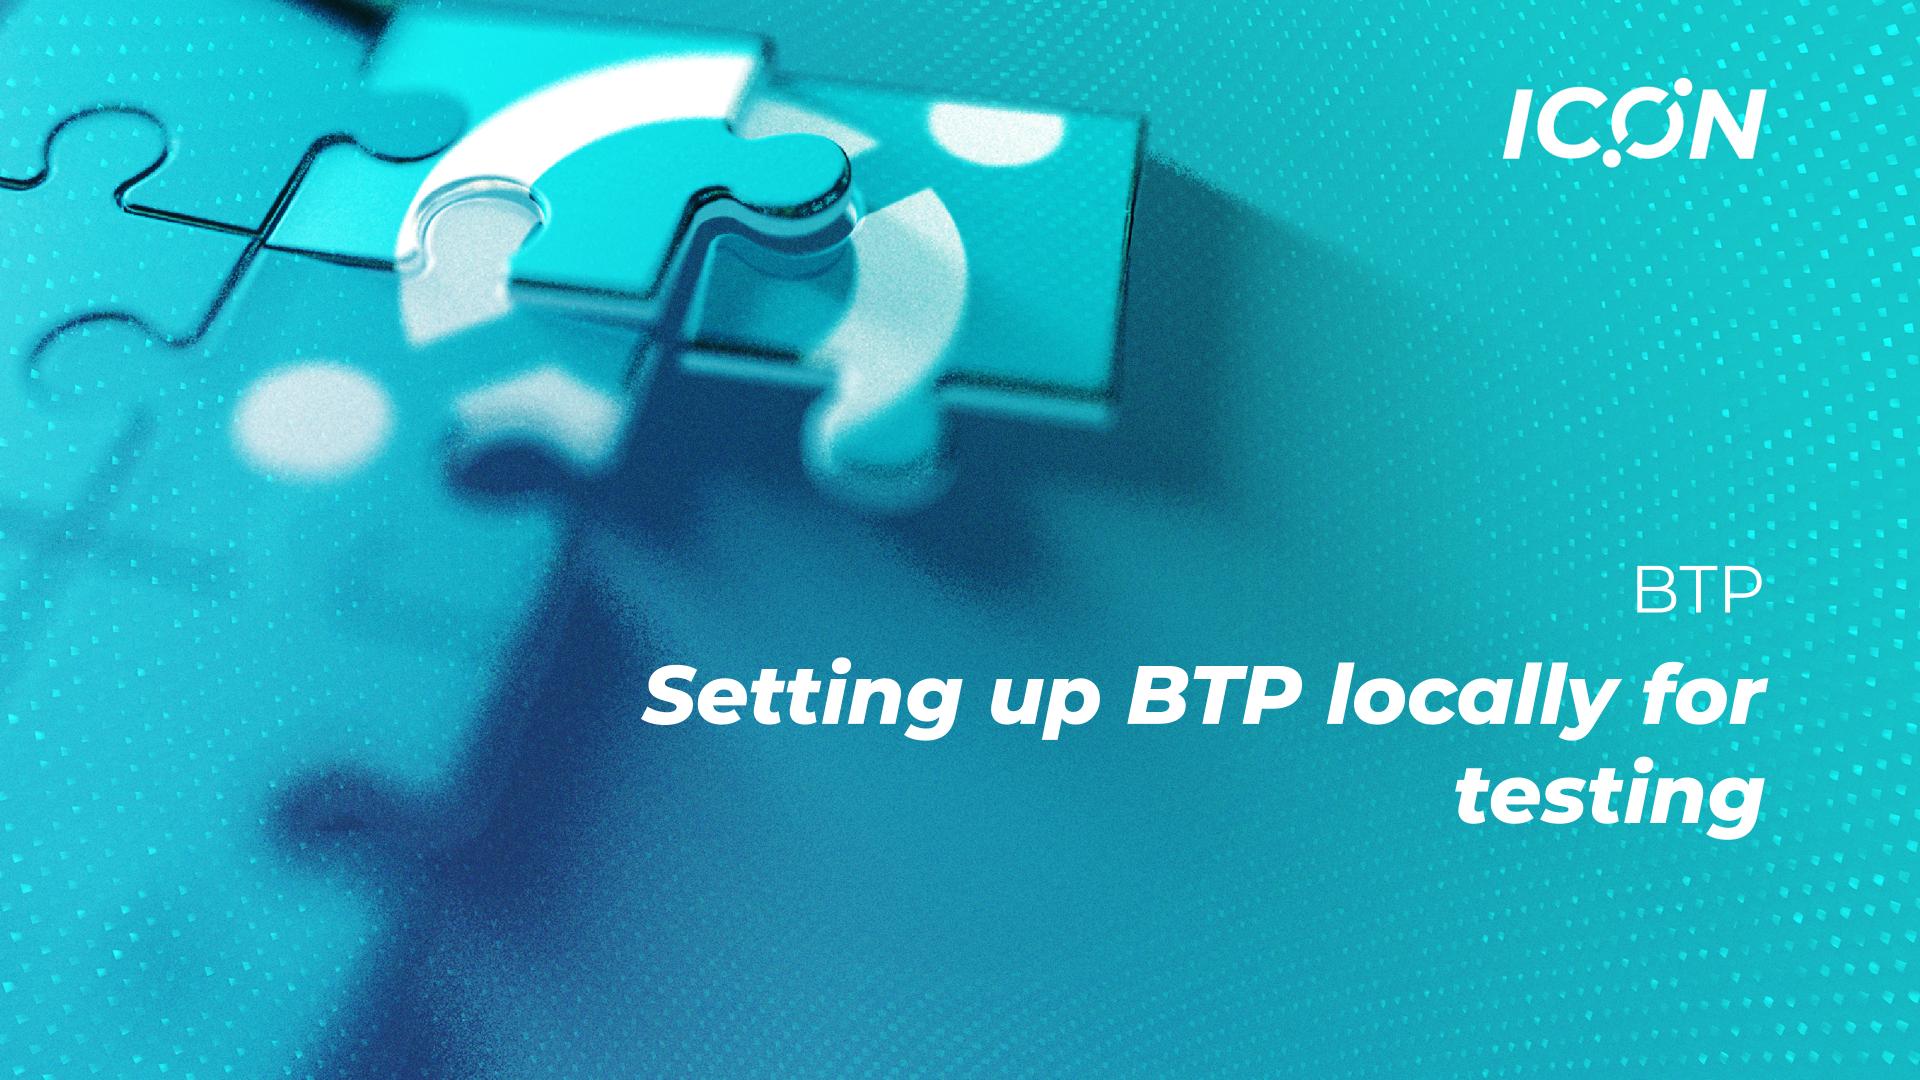 BTP Tutorial for setting up BTP locally for testing